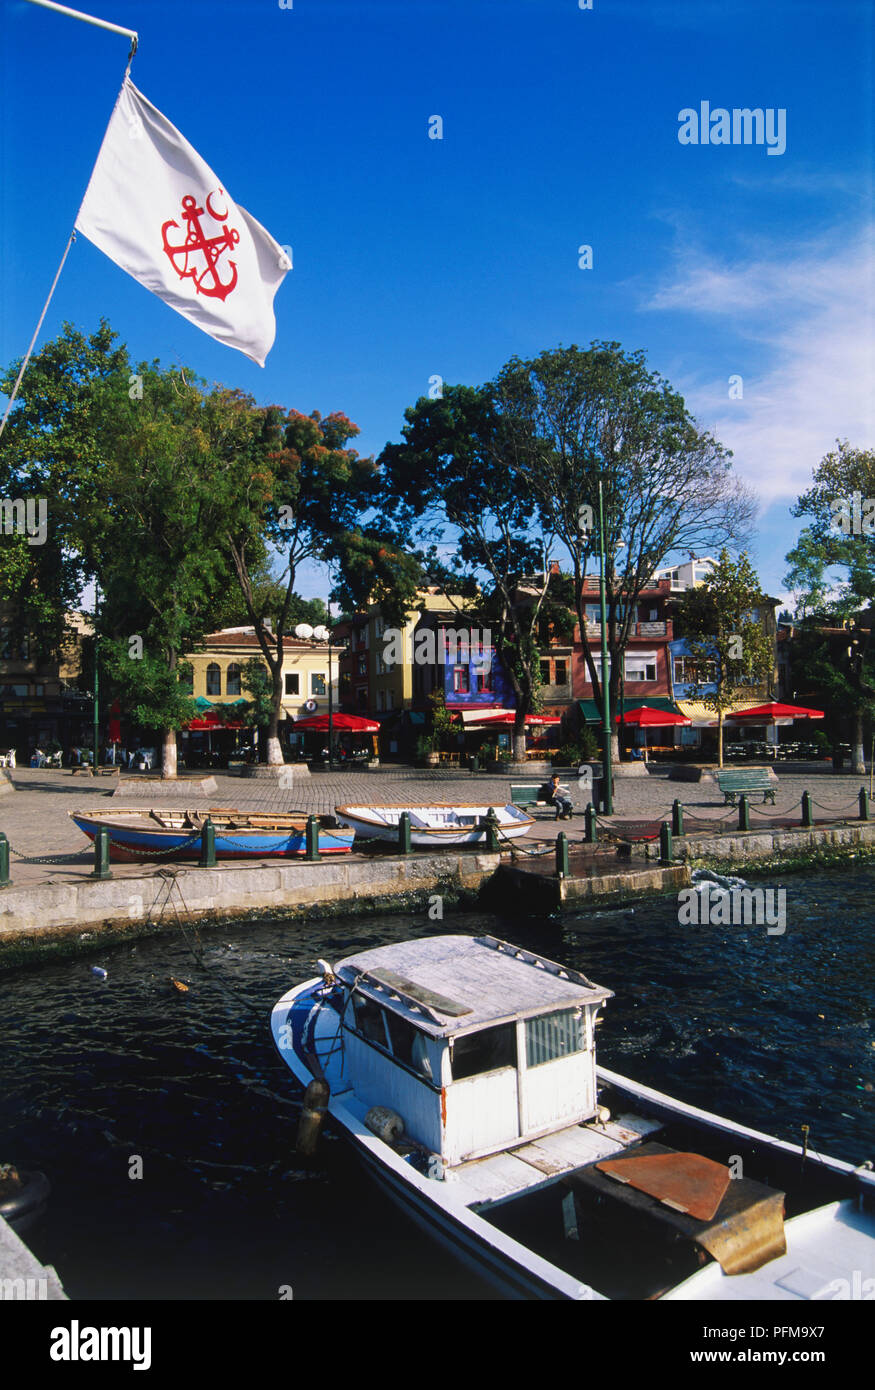 Asia, Turkey, Ortakoy, boat moored to waterfront, square beyond with colourful cafes and tall trees, nautical flag blowing in the breeze. Stock Photo